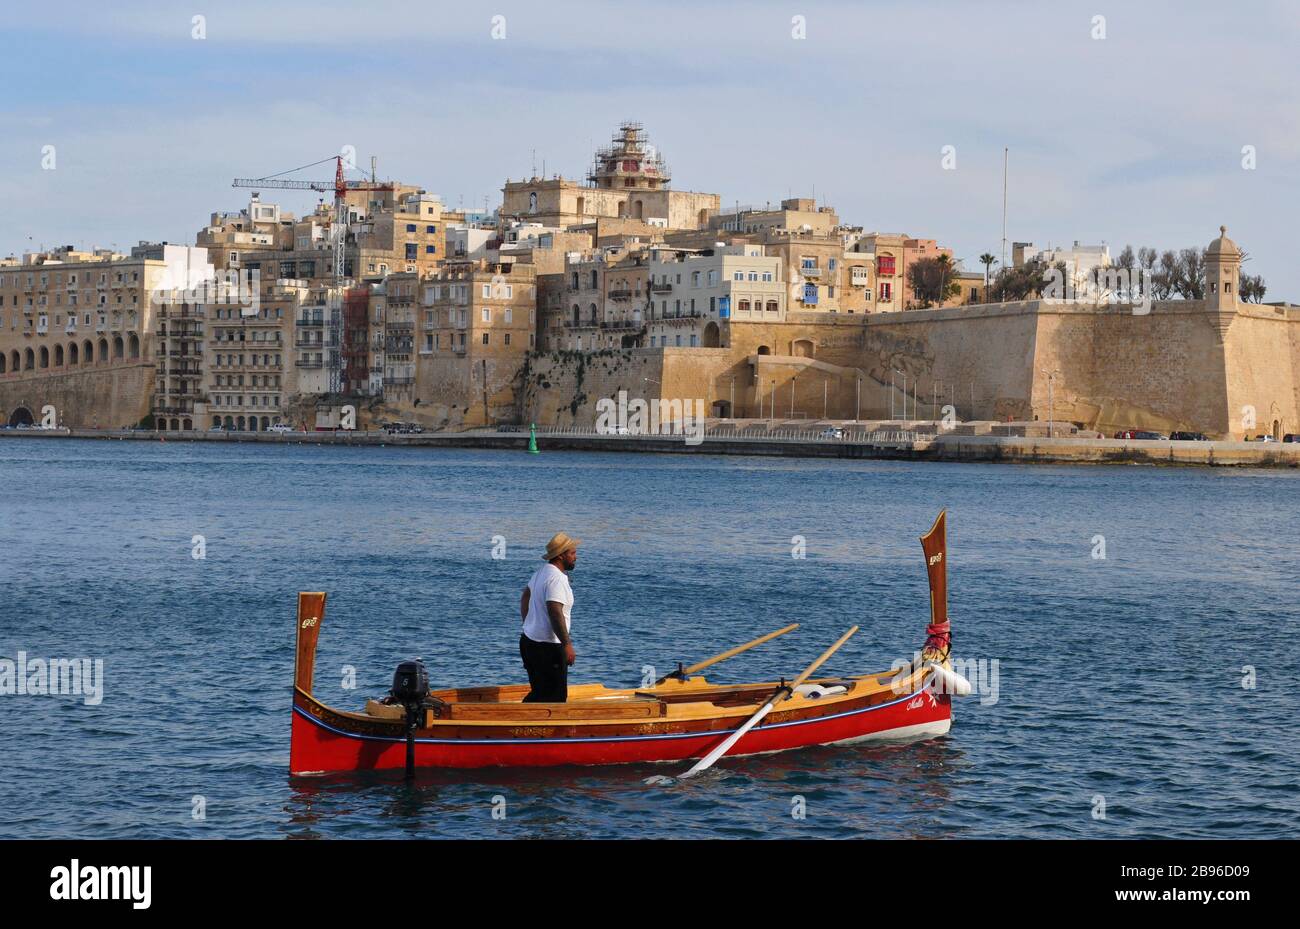 A man aboard a traditional Maltese water taxi, called a dgħajsa, in the Grand Harbour near Senglea, one of the Three Cities. Stock Photo